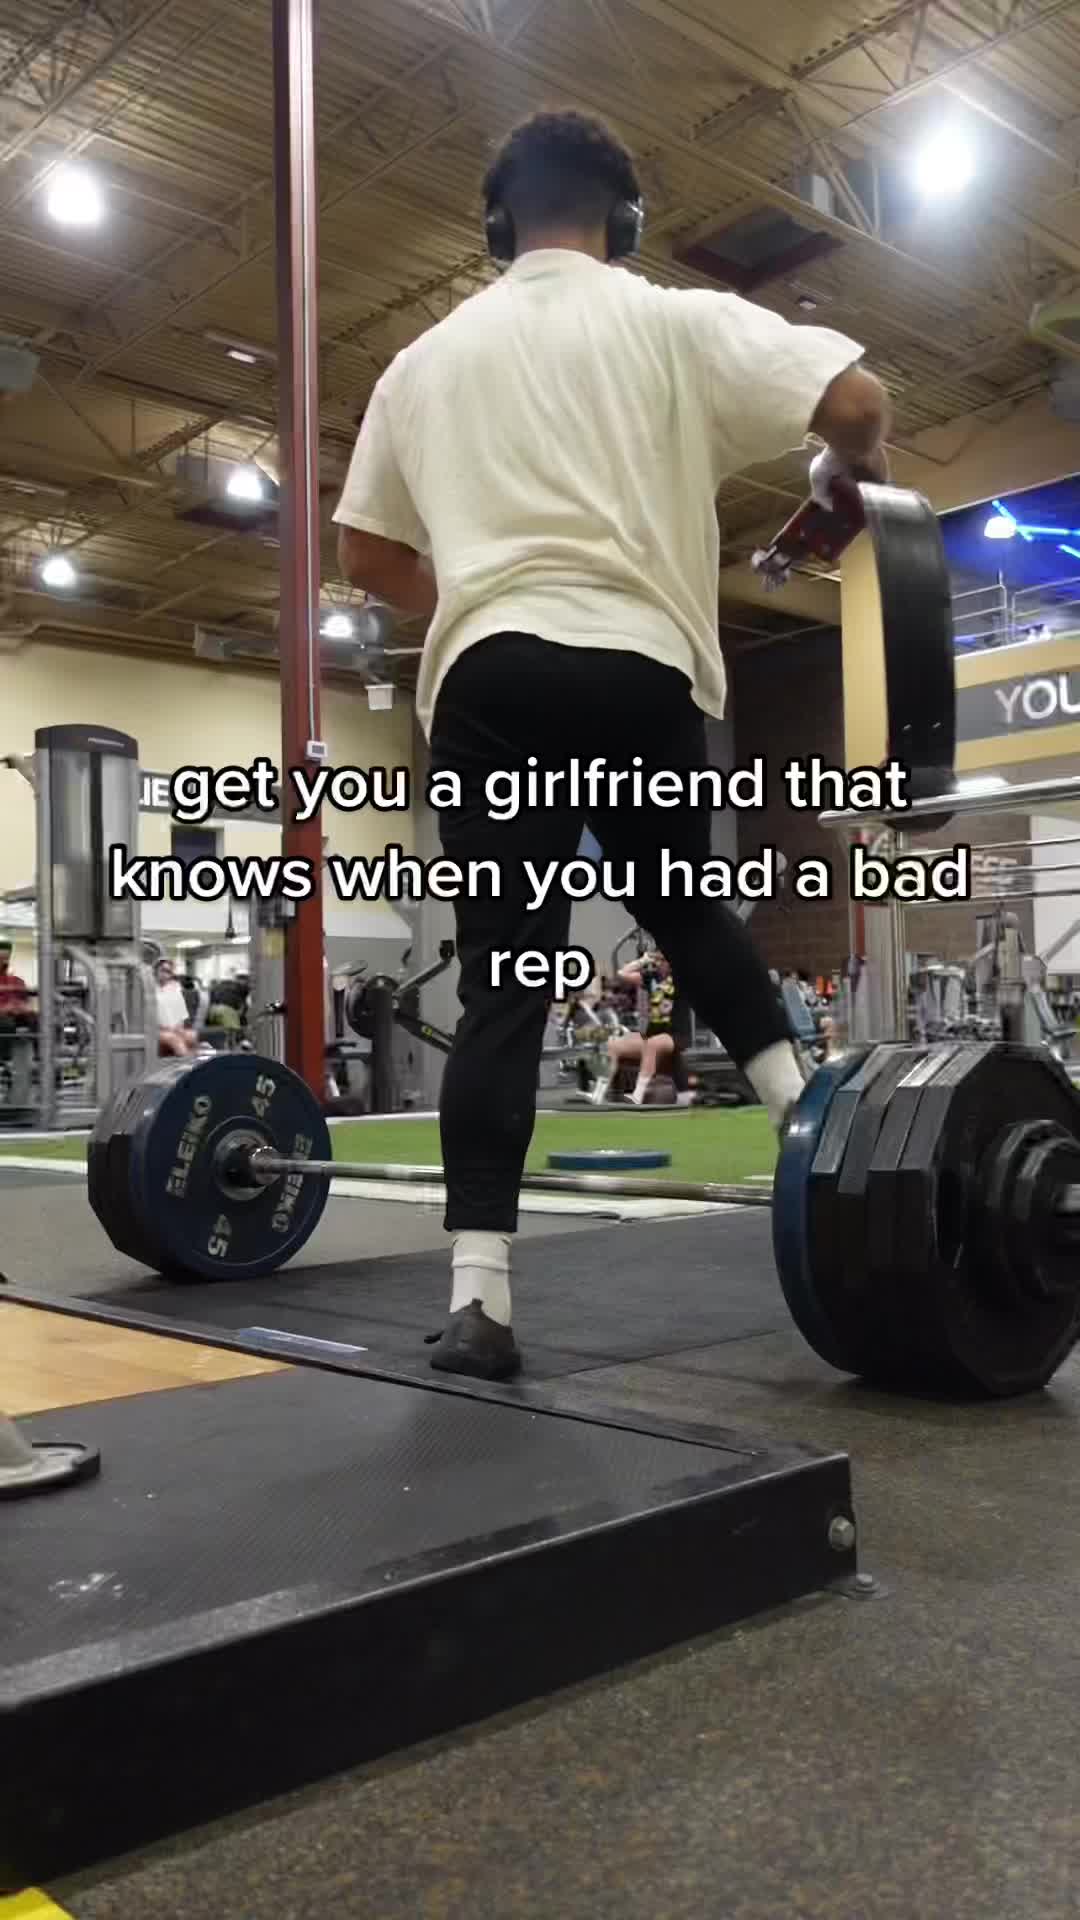 @Just a dude at the gym